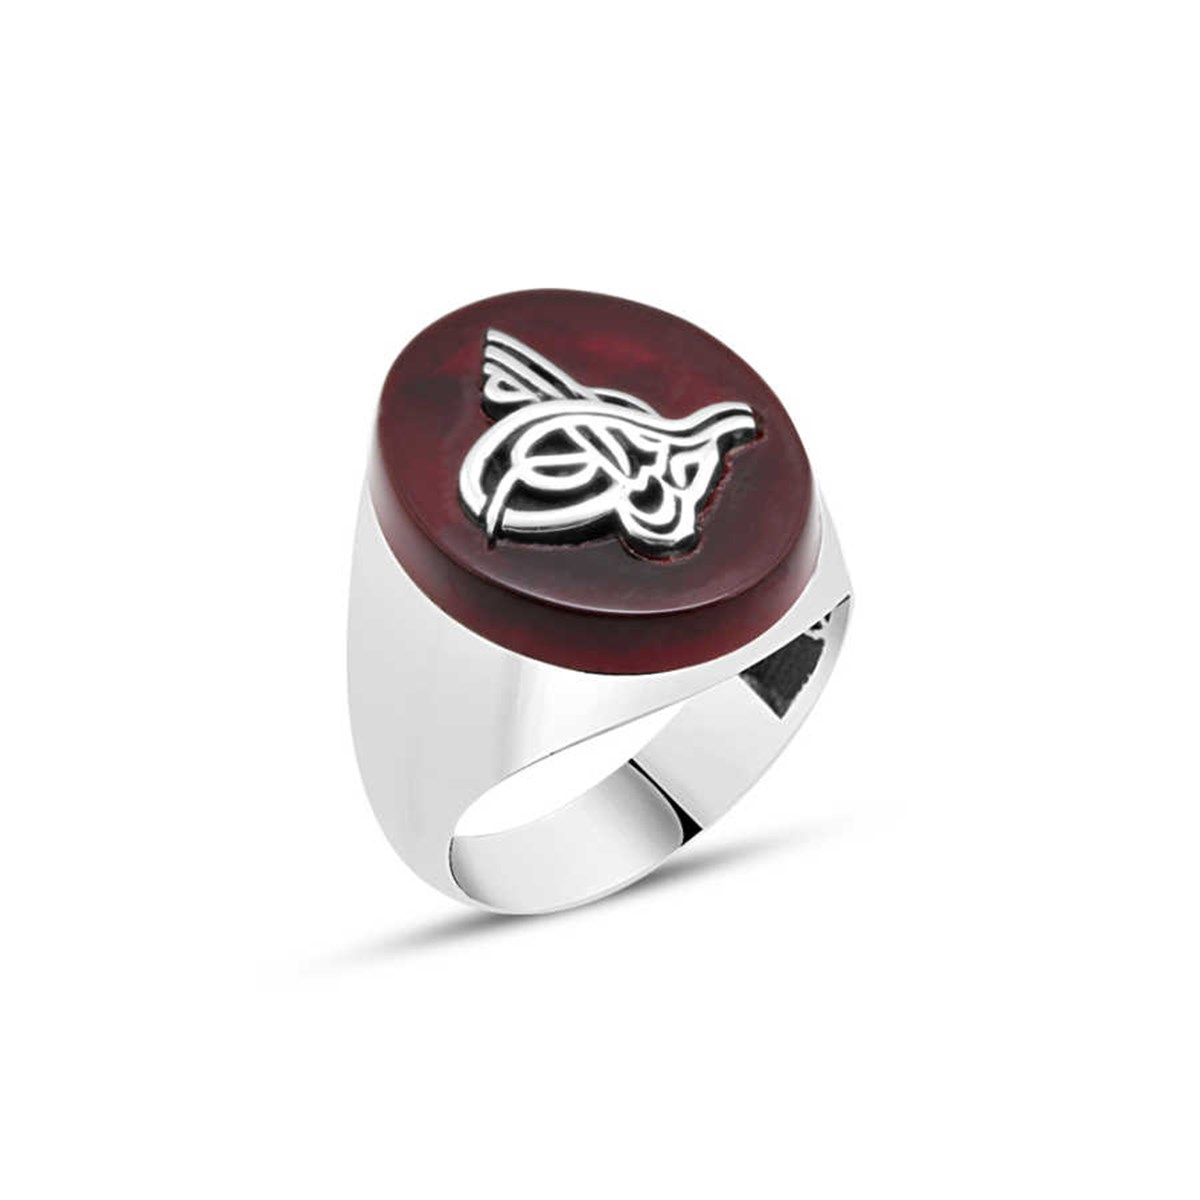 Agate Stone Tugra Sterling Silver Men's Ring